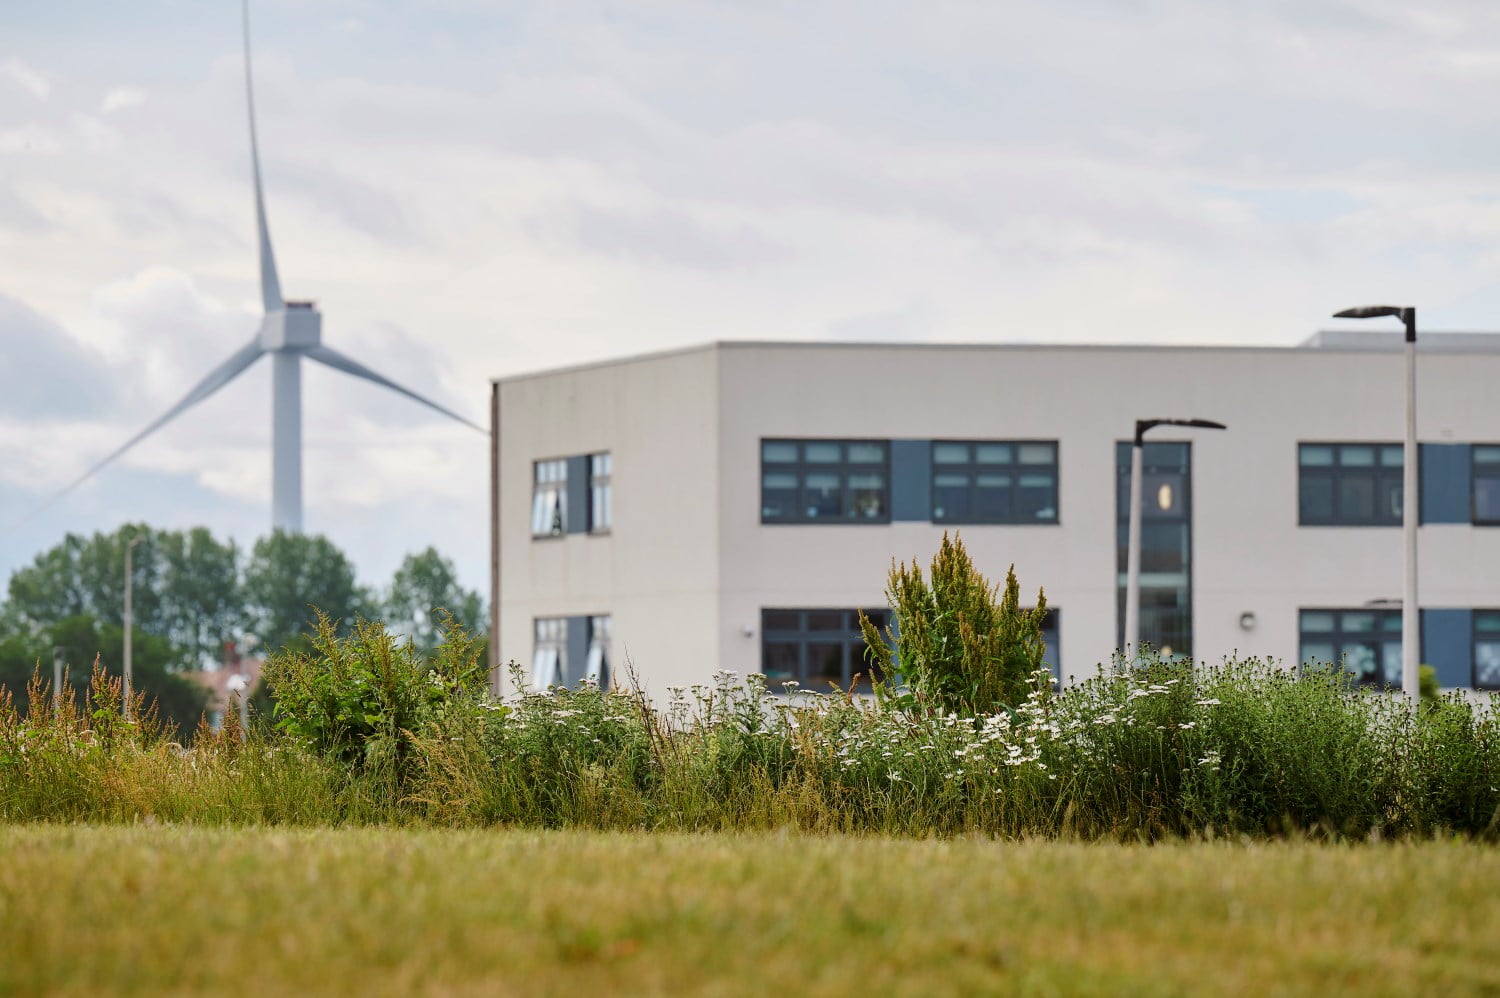 An area of meadow in some climate ready school grounds with a wind turbine in the background and a school building with light coloured surfaces to reflect heat.